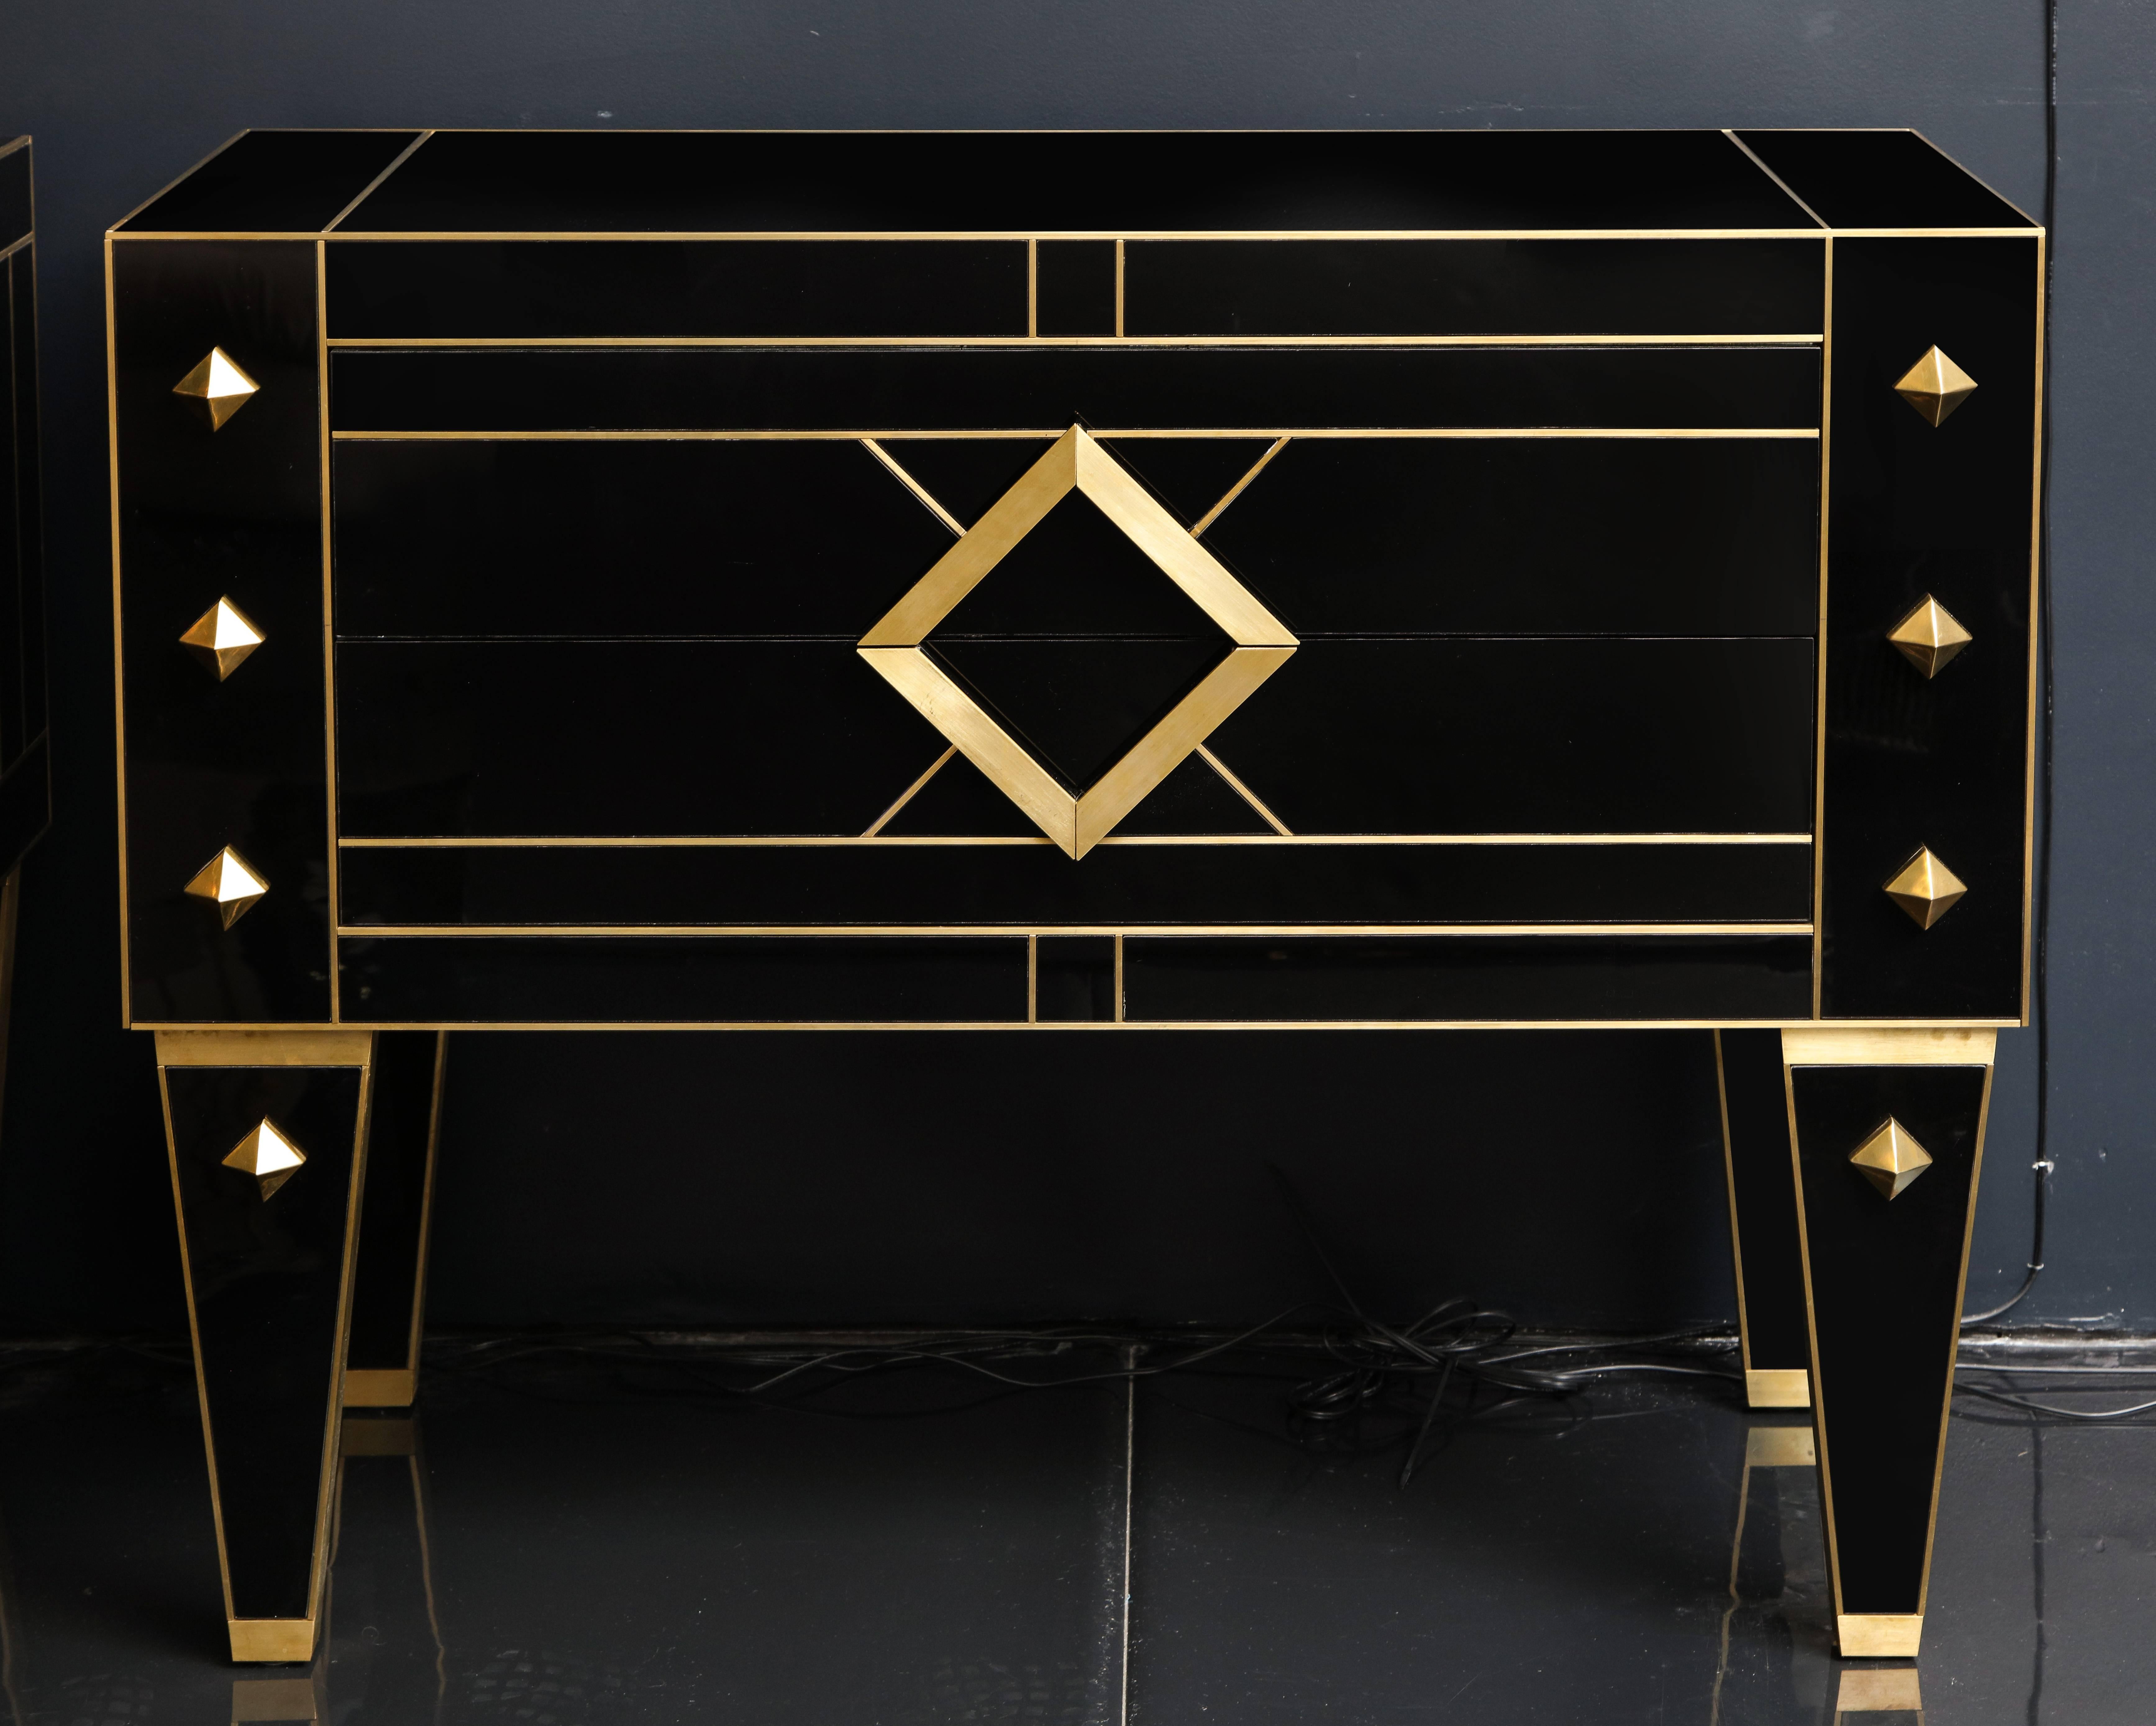 Elegant and timeless pair of black onyx glass chest of drawers with tapered legs and brass inlays. Two drawers lined in glass and mirror. Handcrafted in Spain exclusively for us. An exquisite work of art signed by artist/maker.

These elegant pair